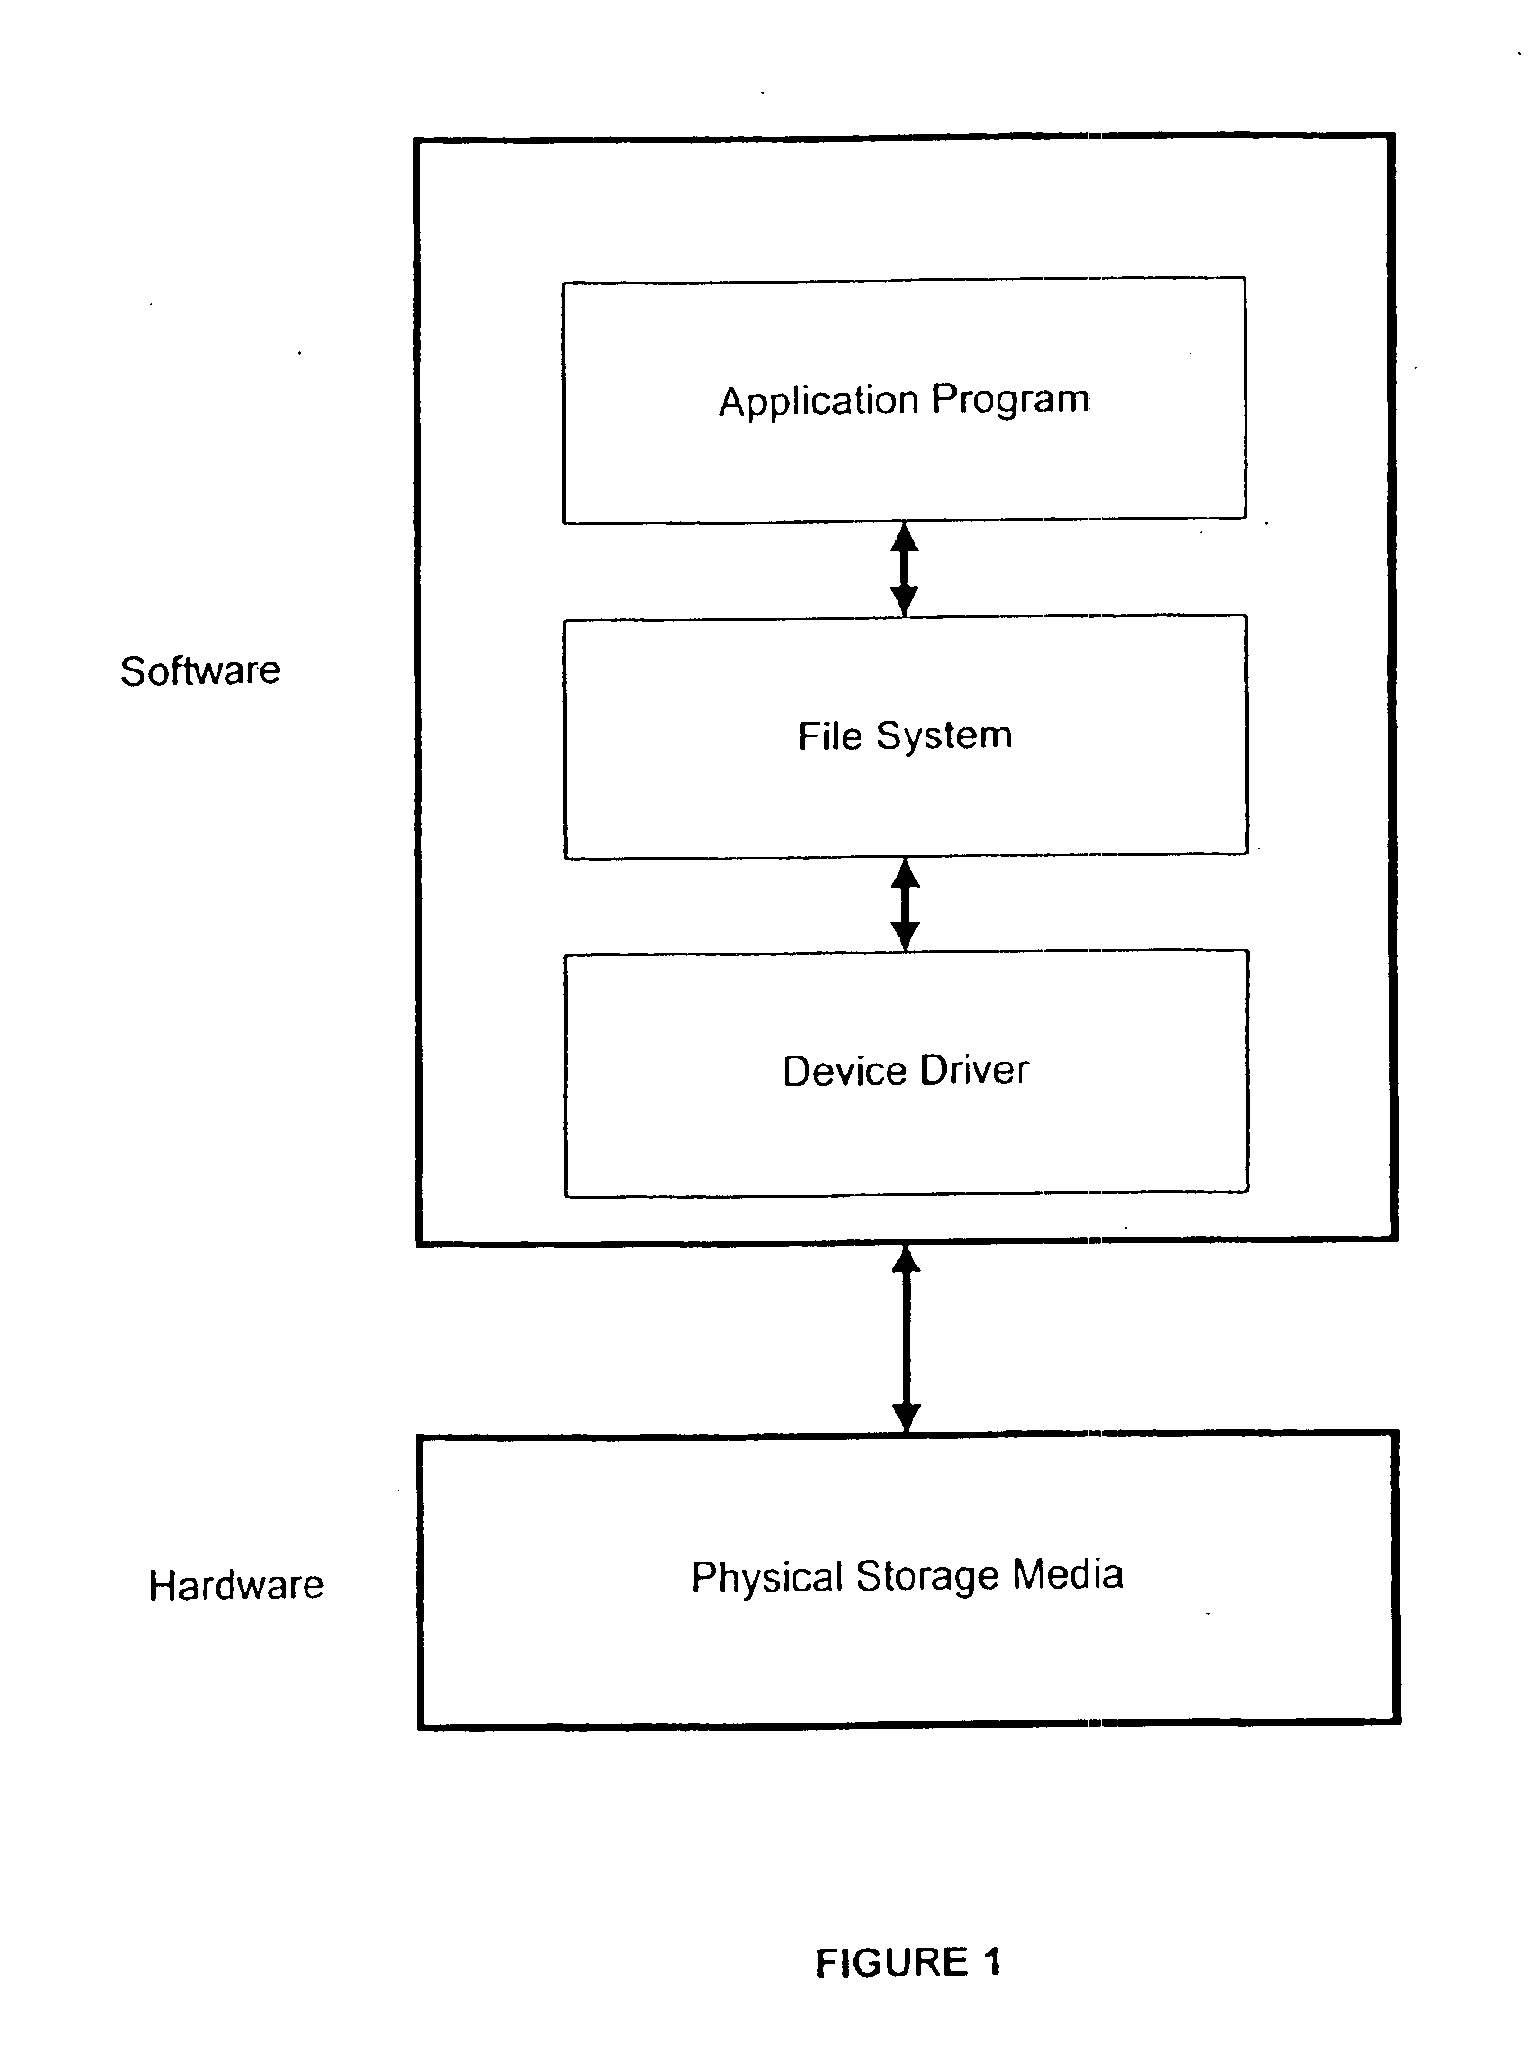 Block device driver enabling a ruggedized file system